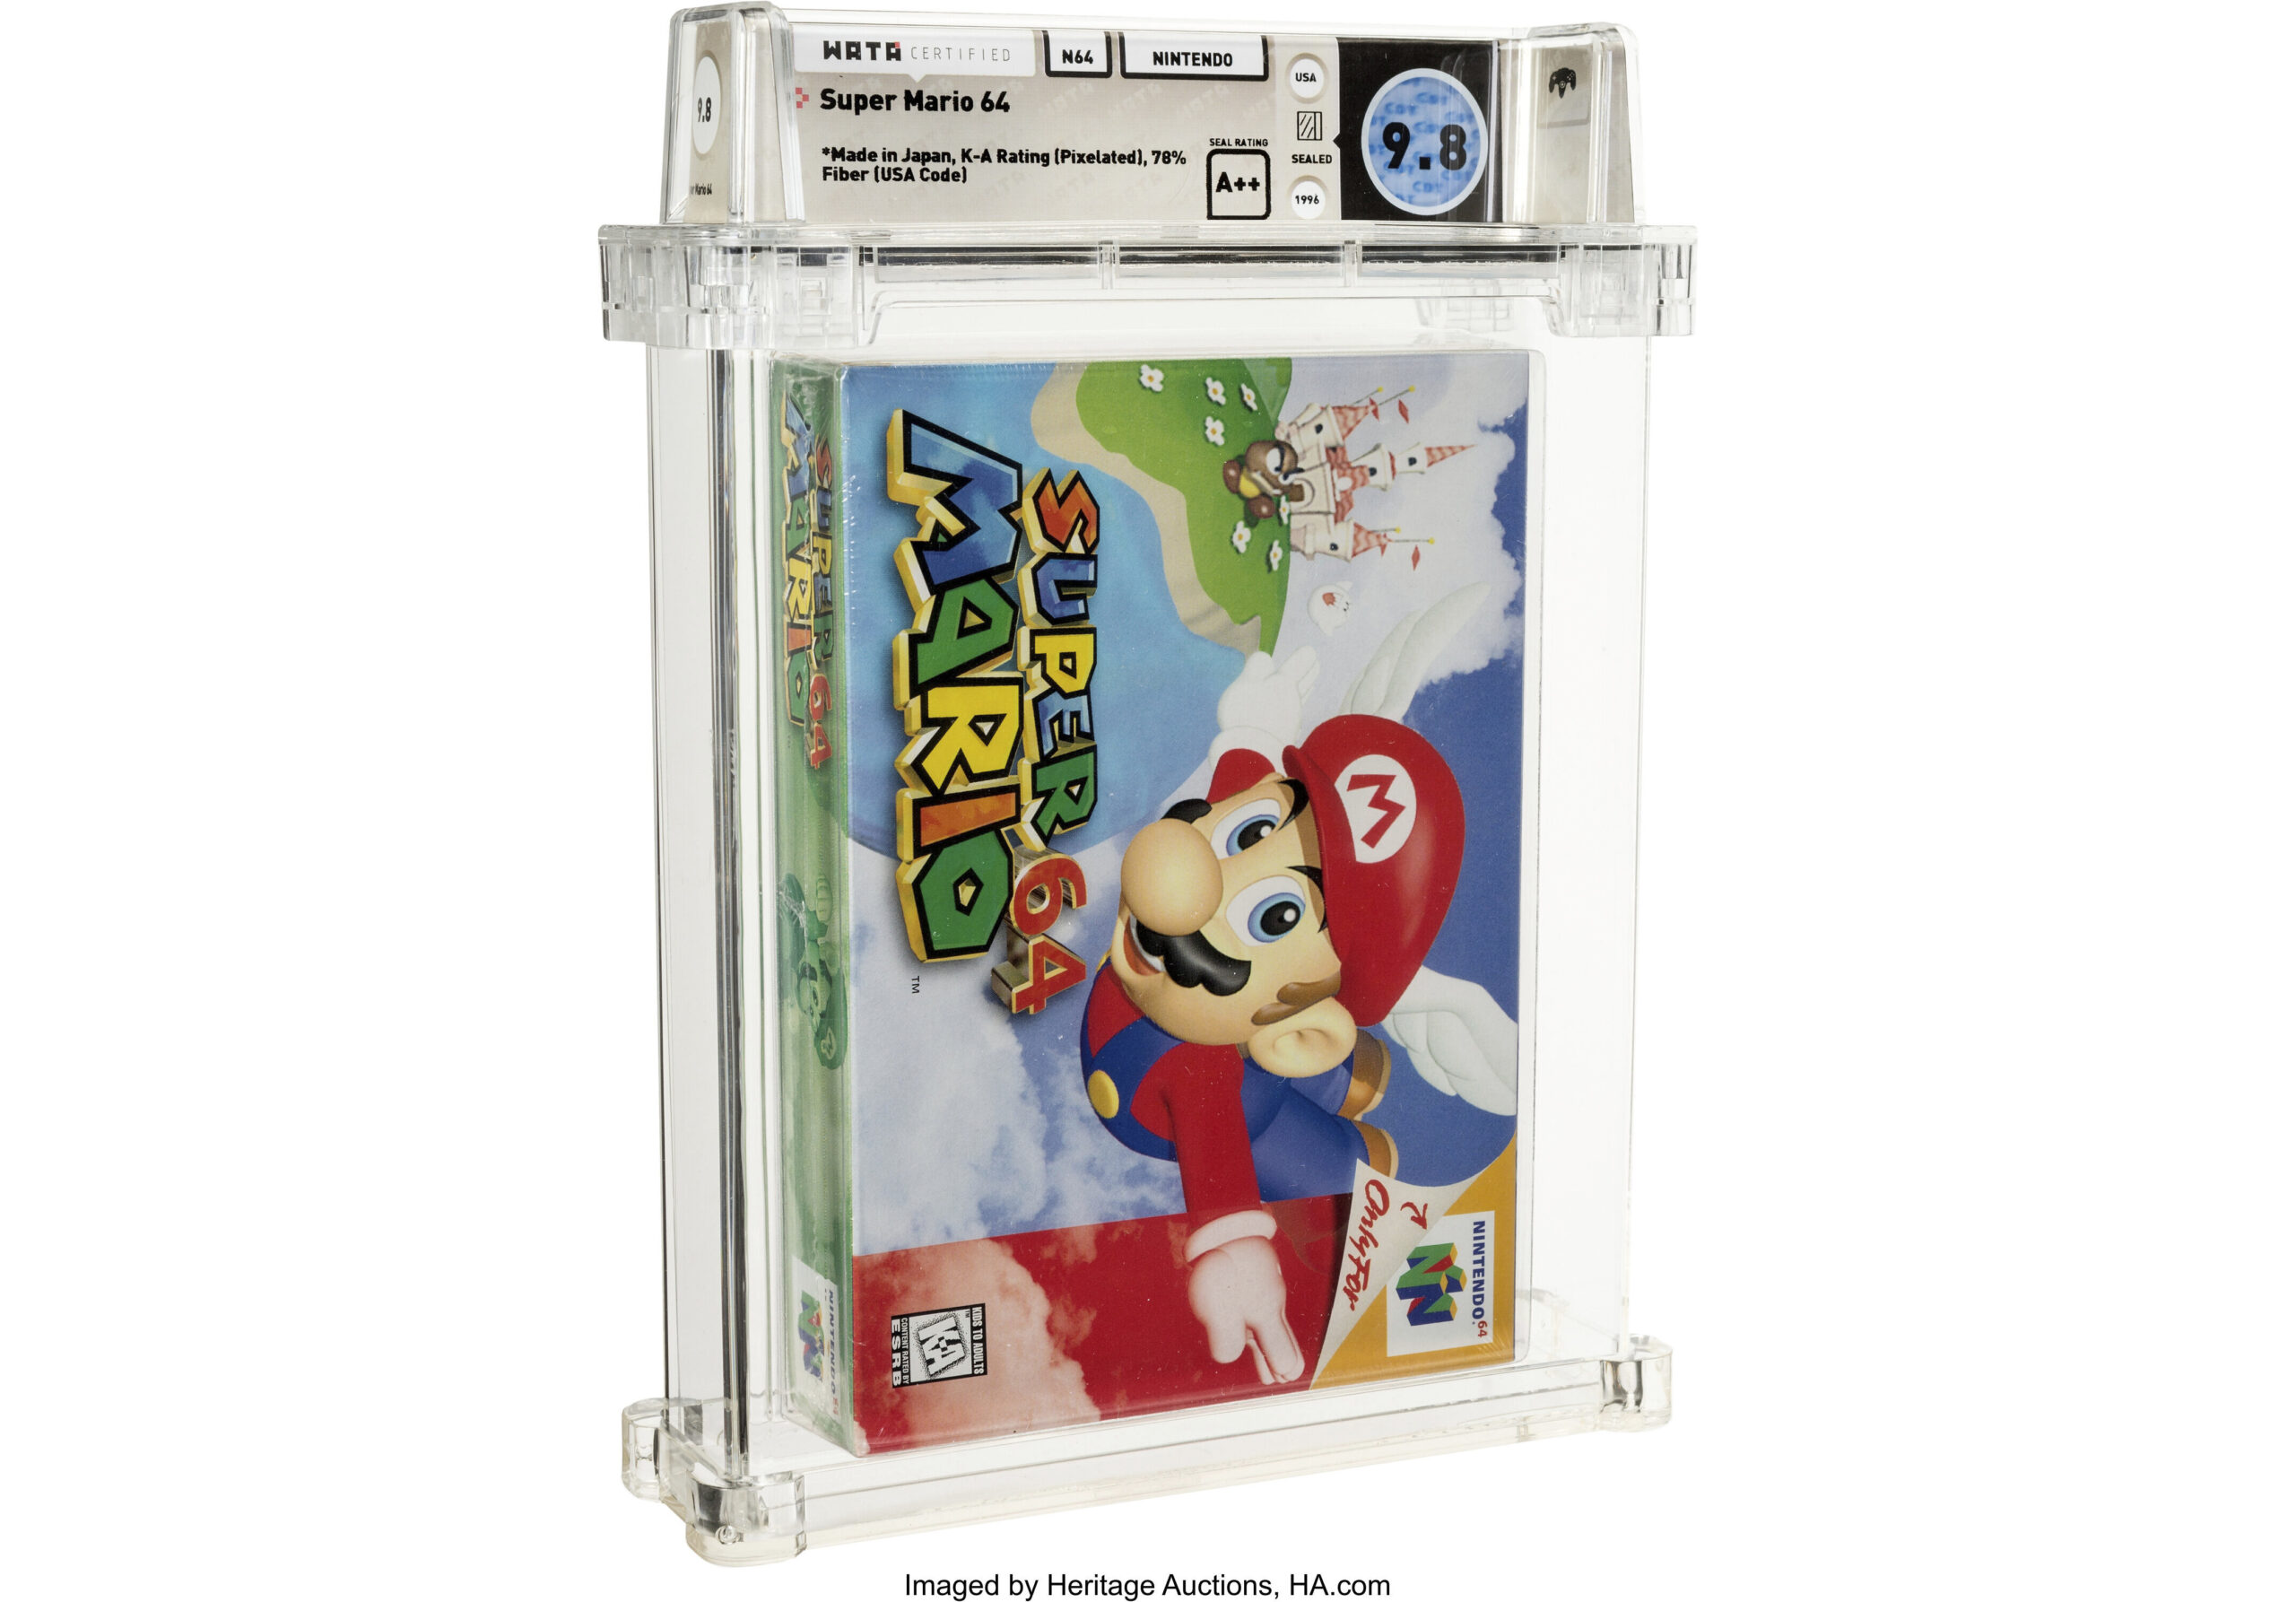 This photo provided by Heritage Auctions shows an unopened copy of Nintendo’s Super Mario 64 that has sold at auction for $1.56 million. Heritage Auctions in Dallas said that the 1996 video game sold Sunday, July 11, 2021, breaking its previous record price for the sale of a single video game. (Courtesy of Heritage Auctions via AP)